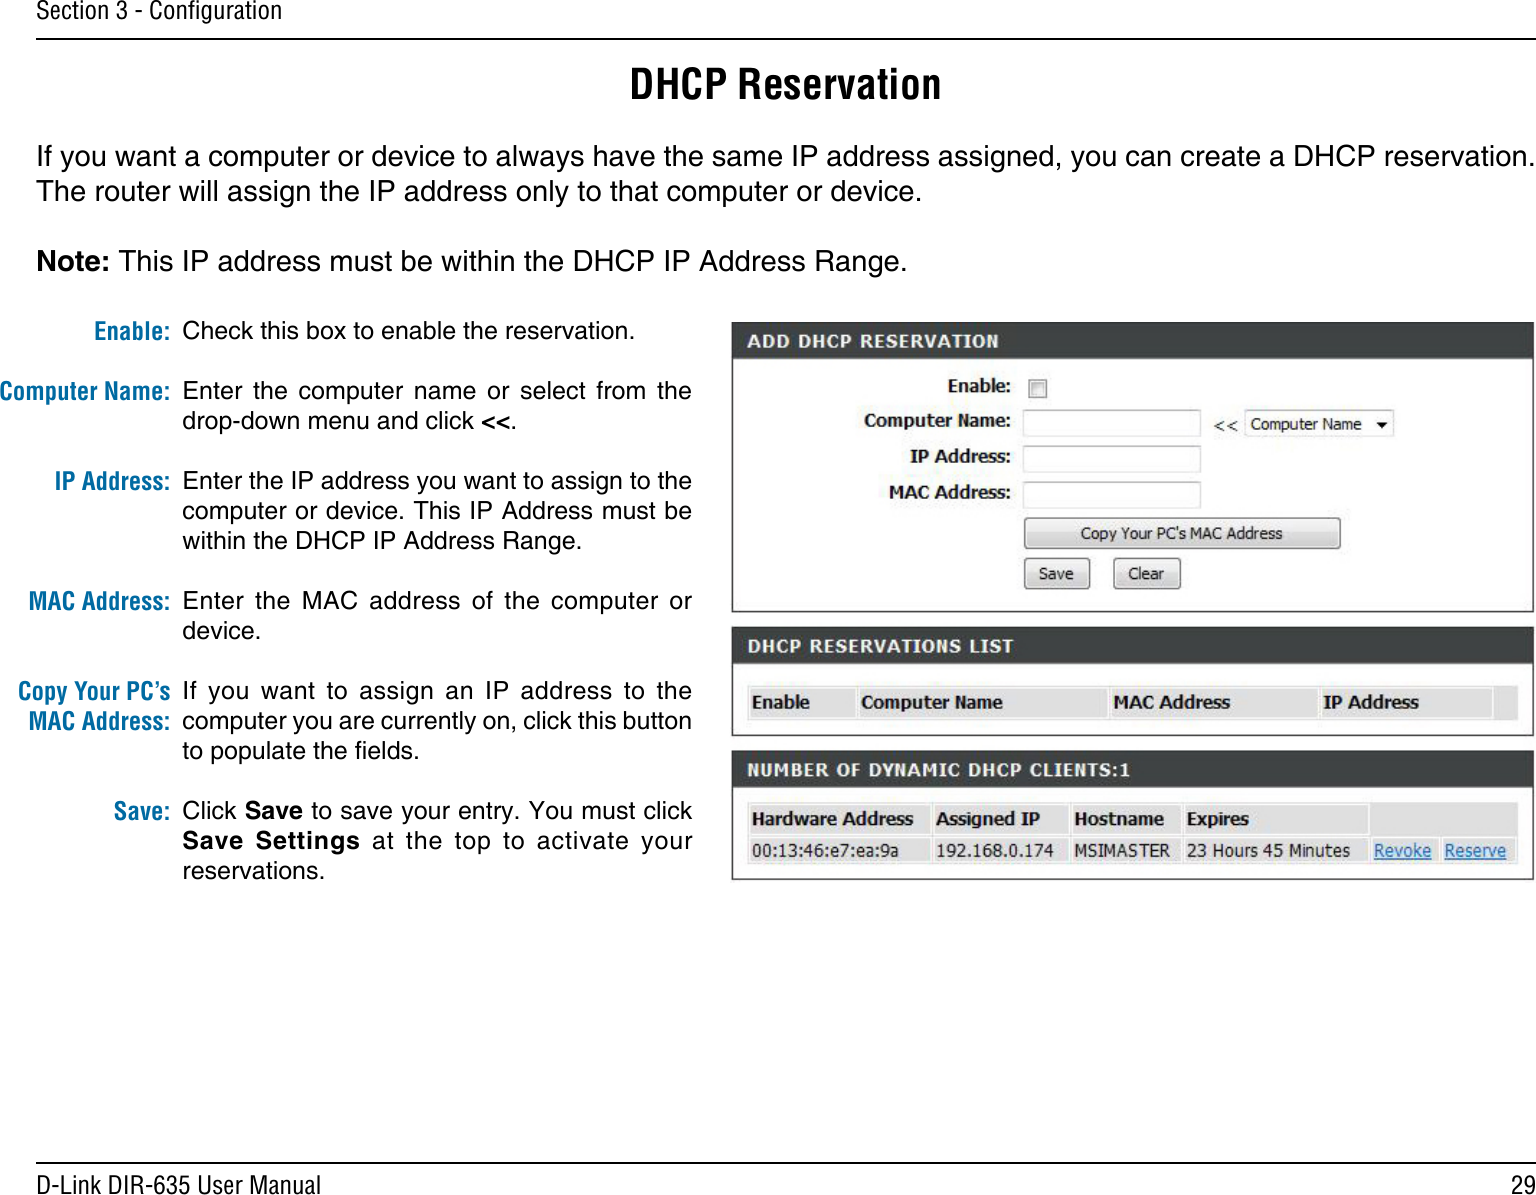 29D-Link DIR-635 User ManualSection 3 - ConﬁgurationDHCP ReservationIf you want a computer or device to always have the same IP address assigned, you can create a DHCP reservation. The router will assign the IP address only to that computer or device. Note: This IP address must be within the DHCP IP Address Range.Check this box to enable the reservation.Enter  the  computer  name  or  select  from  the drop-down menu and click &lt;&lt;.Enter the IP address you want to assign to the computer or device. This IP Address must be within the DHCP IP Address Range.Enter  the  MAC  address  of  the  computer  or device.If  you  want  to  assign  an  IP  address  to  the computer you are currently on, click this button to populate the elds. Click Save to save your entry. You must click Save  Settings  at  the  top  to  activate  your reservations. Enable:Computer Name:IP Address:MAC Address:Copy Your PC’s MAC Address:Save: